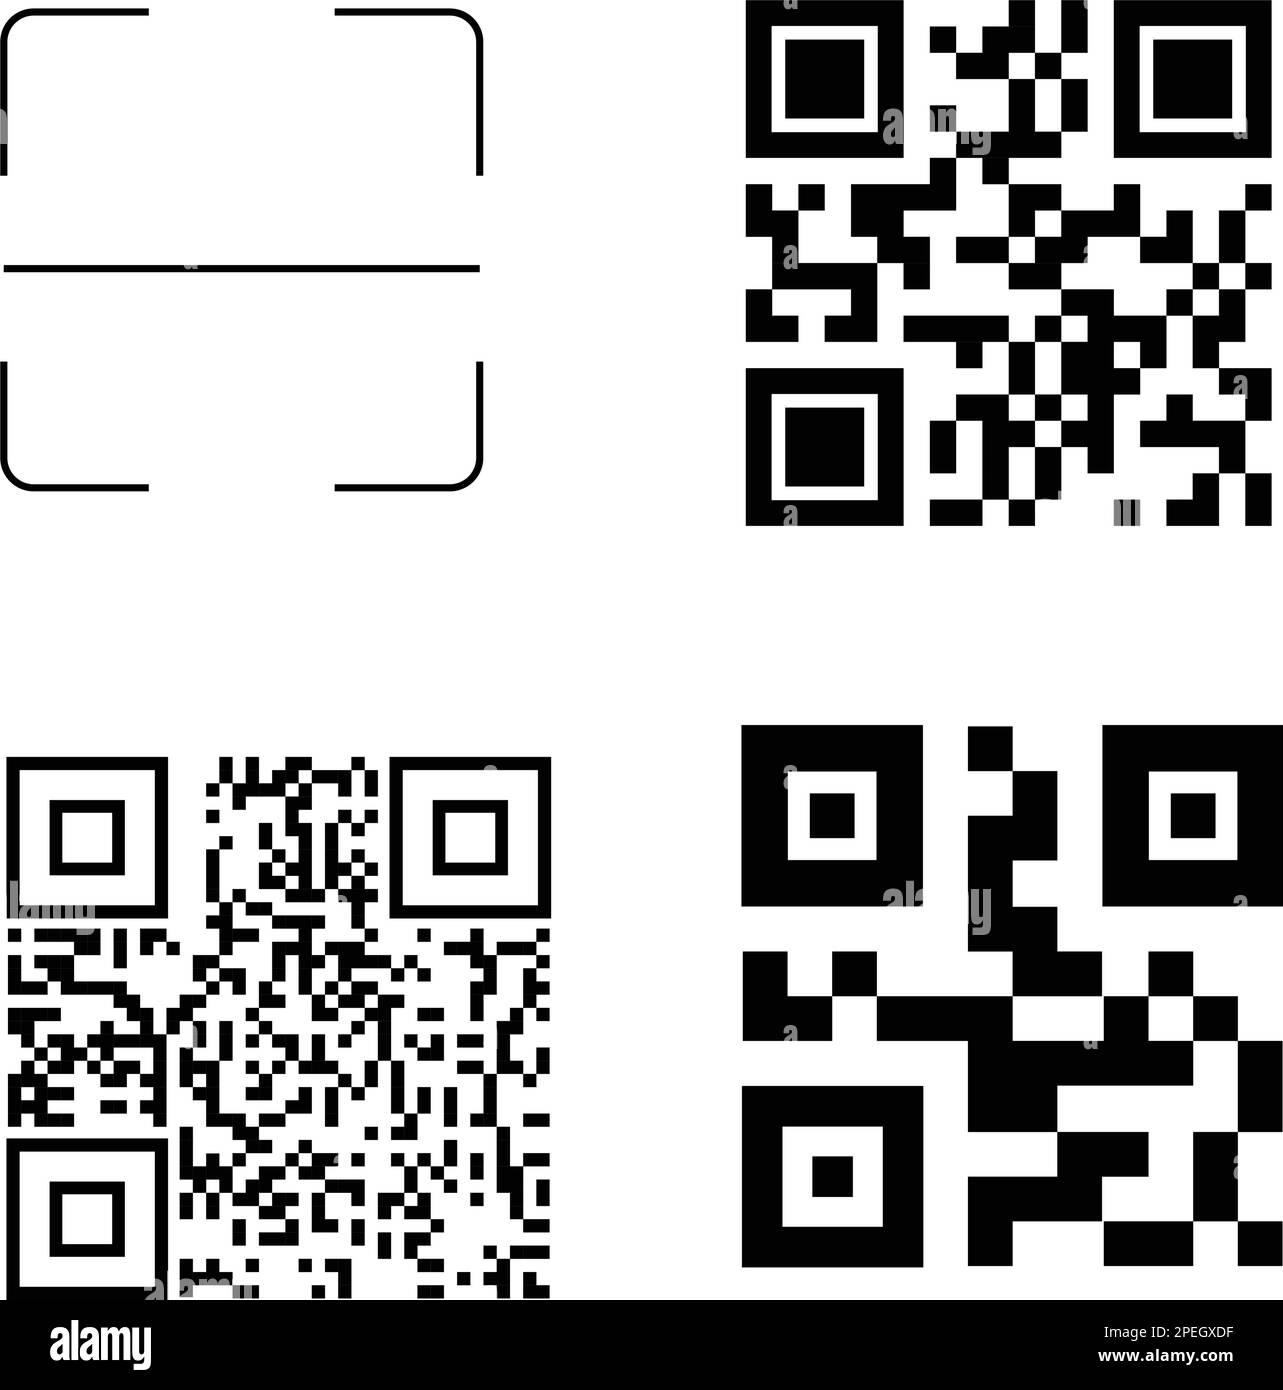 Vector QR code example for smartphone scanning isolated on a white background. Stock Vector